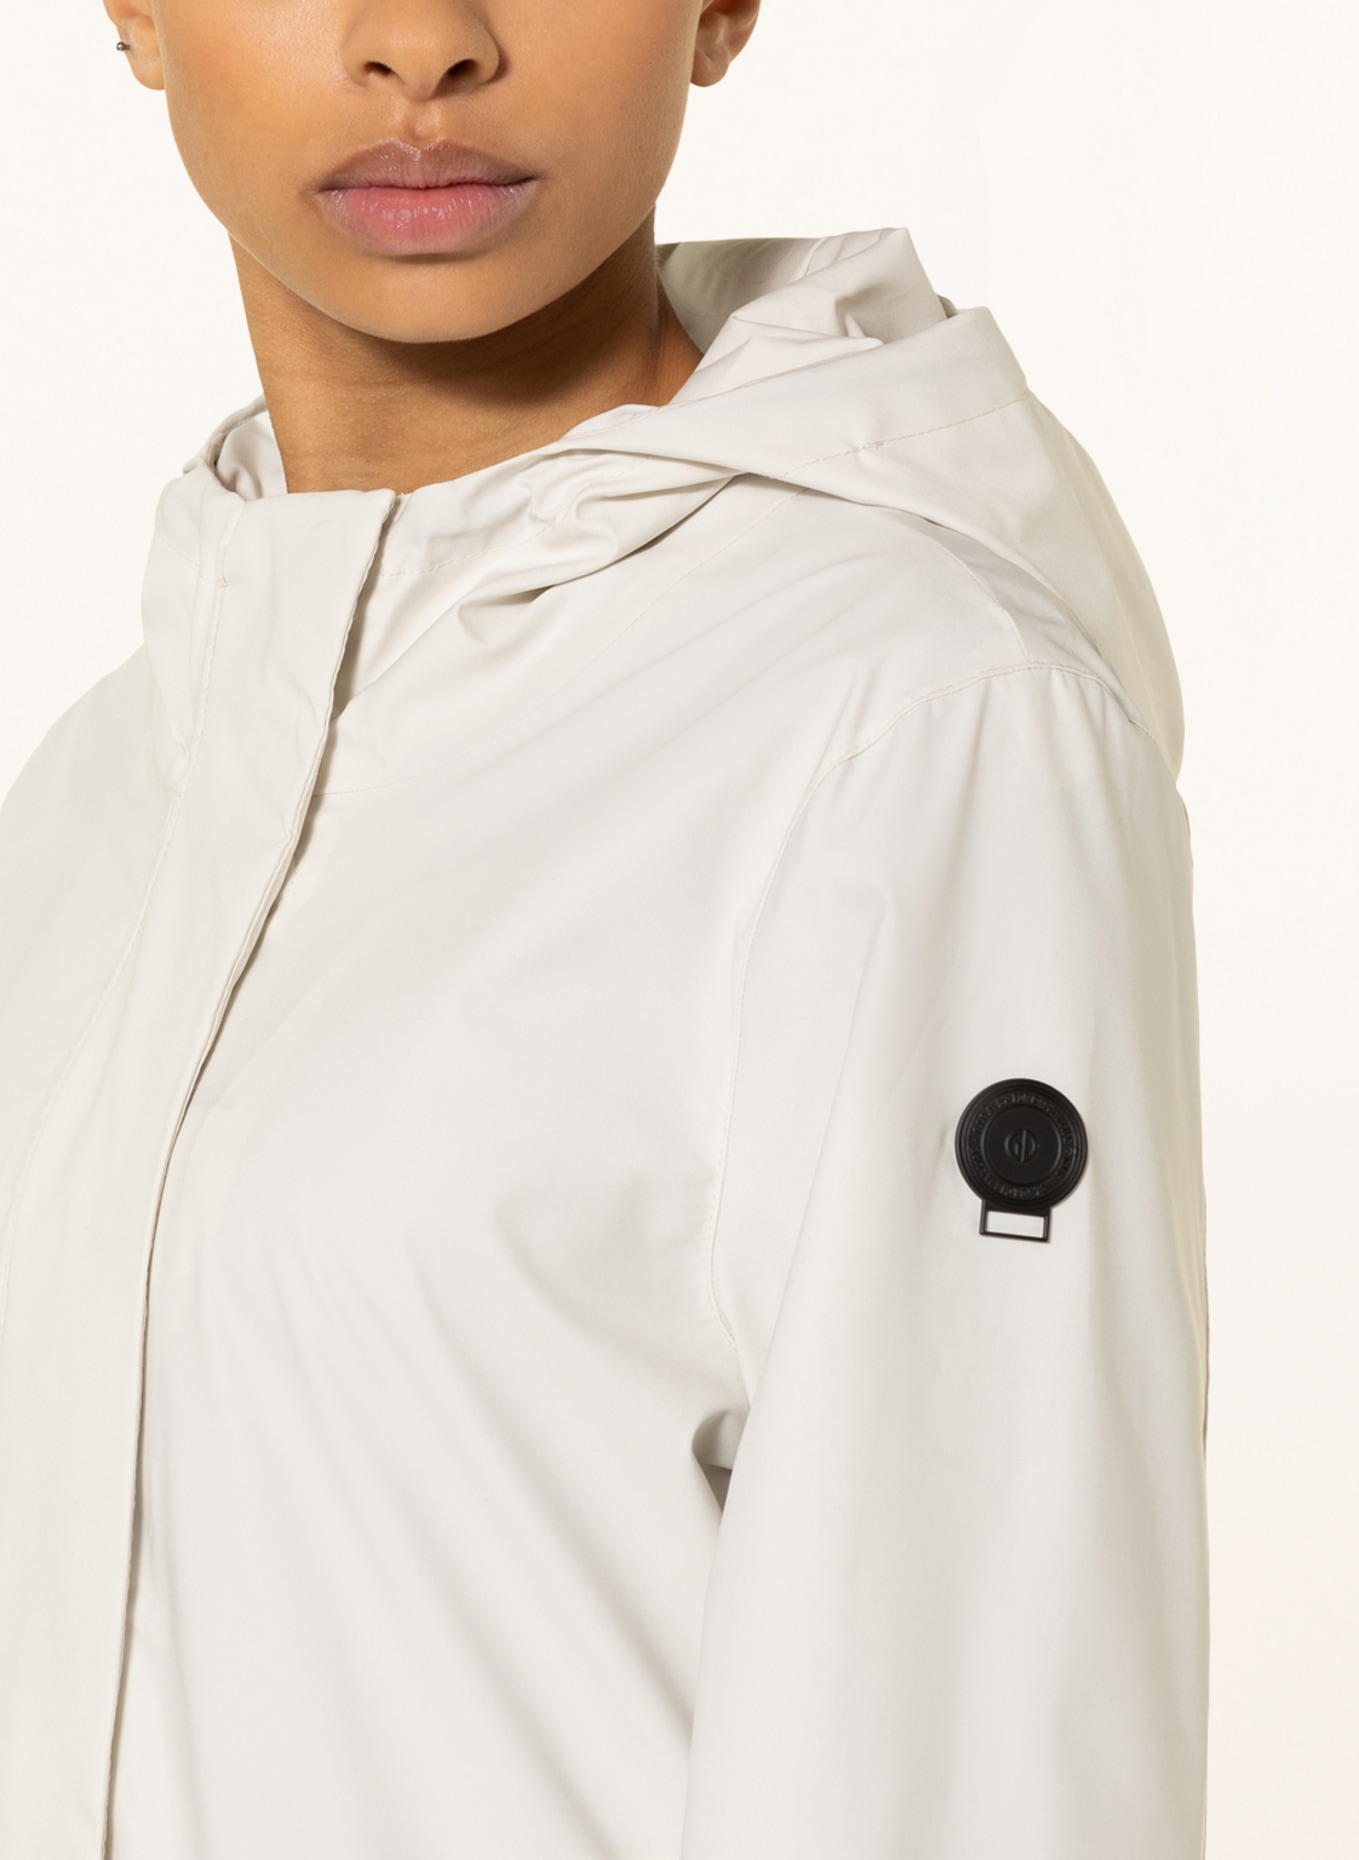 G.I.G.A. by in killtec 152 cream DX GS Outdoor jacket